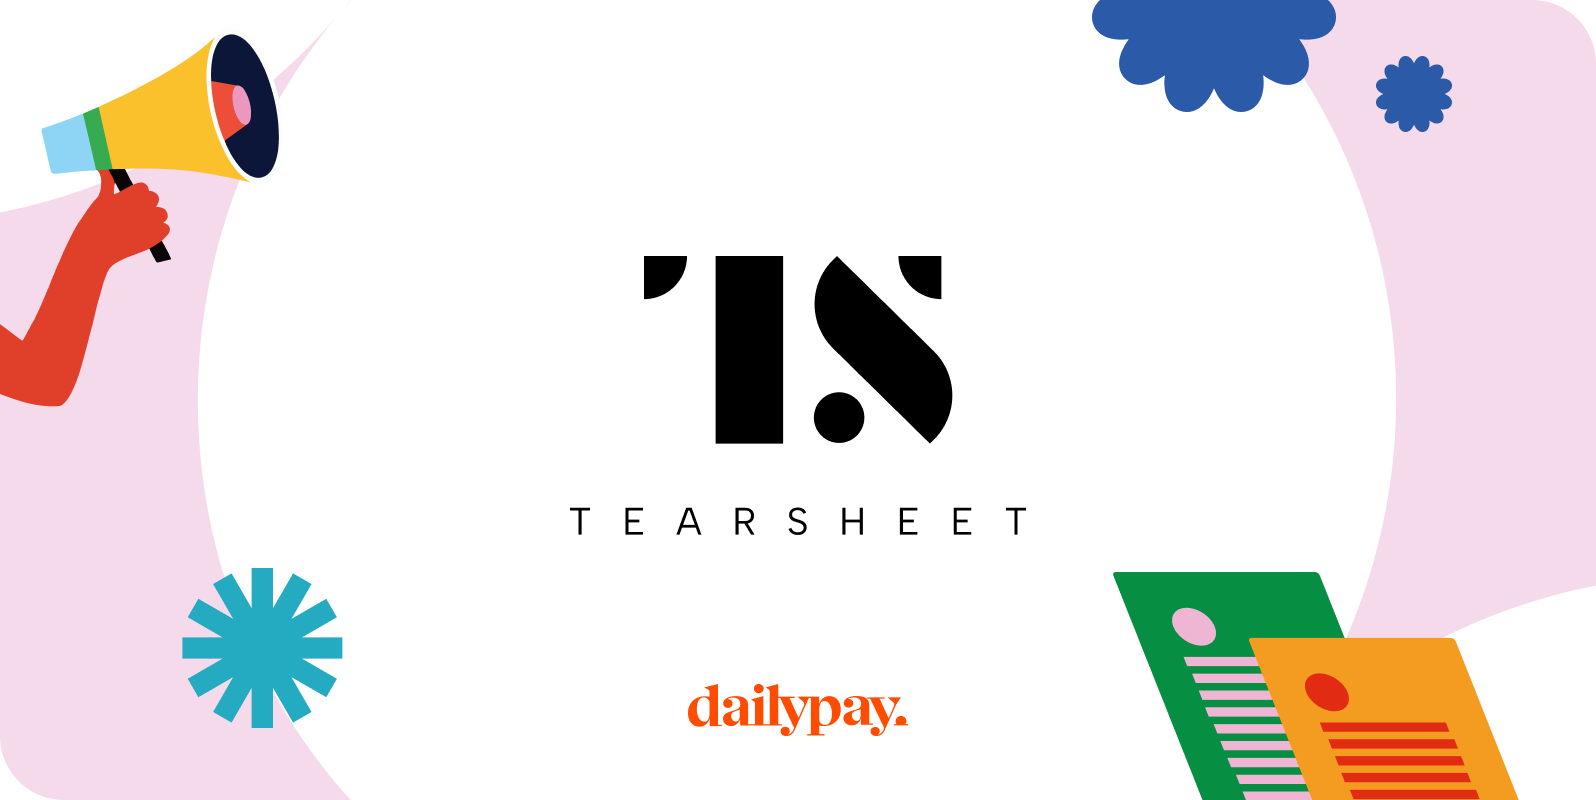 Logo for Tearsheet with a hand holding a megaphone and a variety of abstract shapes on the border. DailyPay logo appears at the bottom.